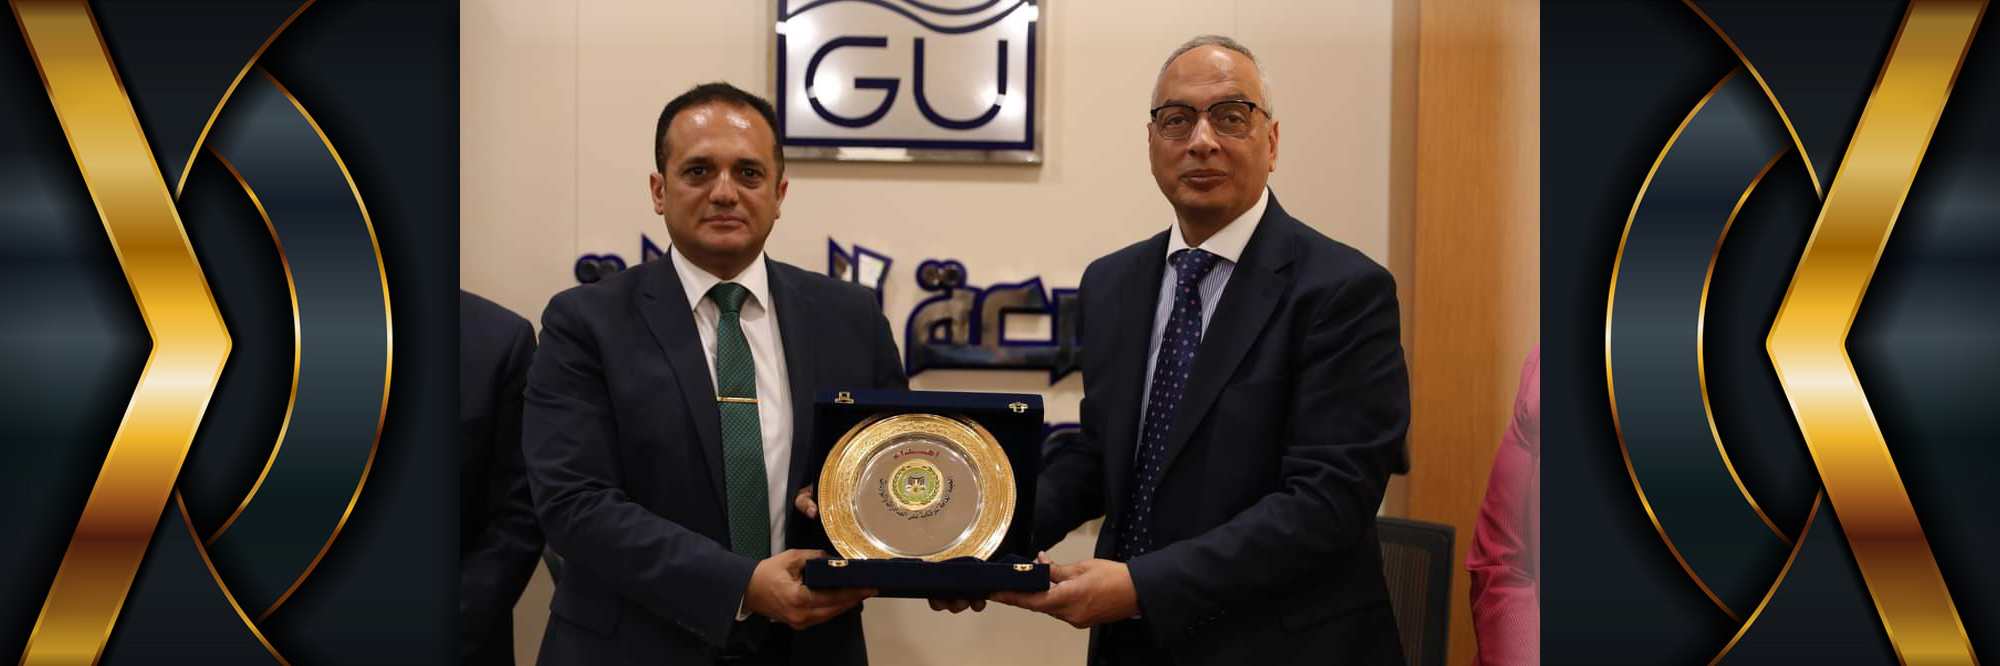 Eng. / Essam Al-Naggar Chairman of GOEIC and Dr. / Mohamed El-Shenawy, President of Galala University signs a joint cooperation protocol to exchange experiences in the fields of projects, scientific research, consultations, technical support, training and education.